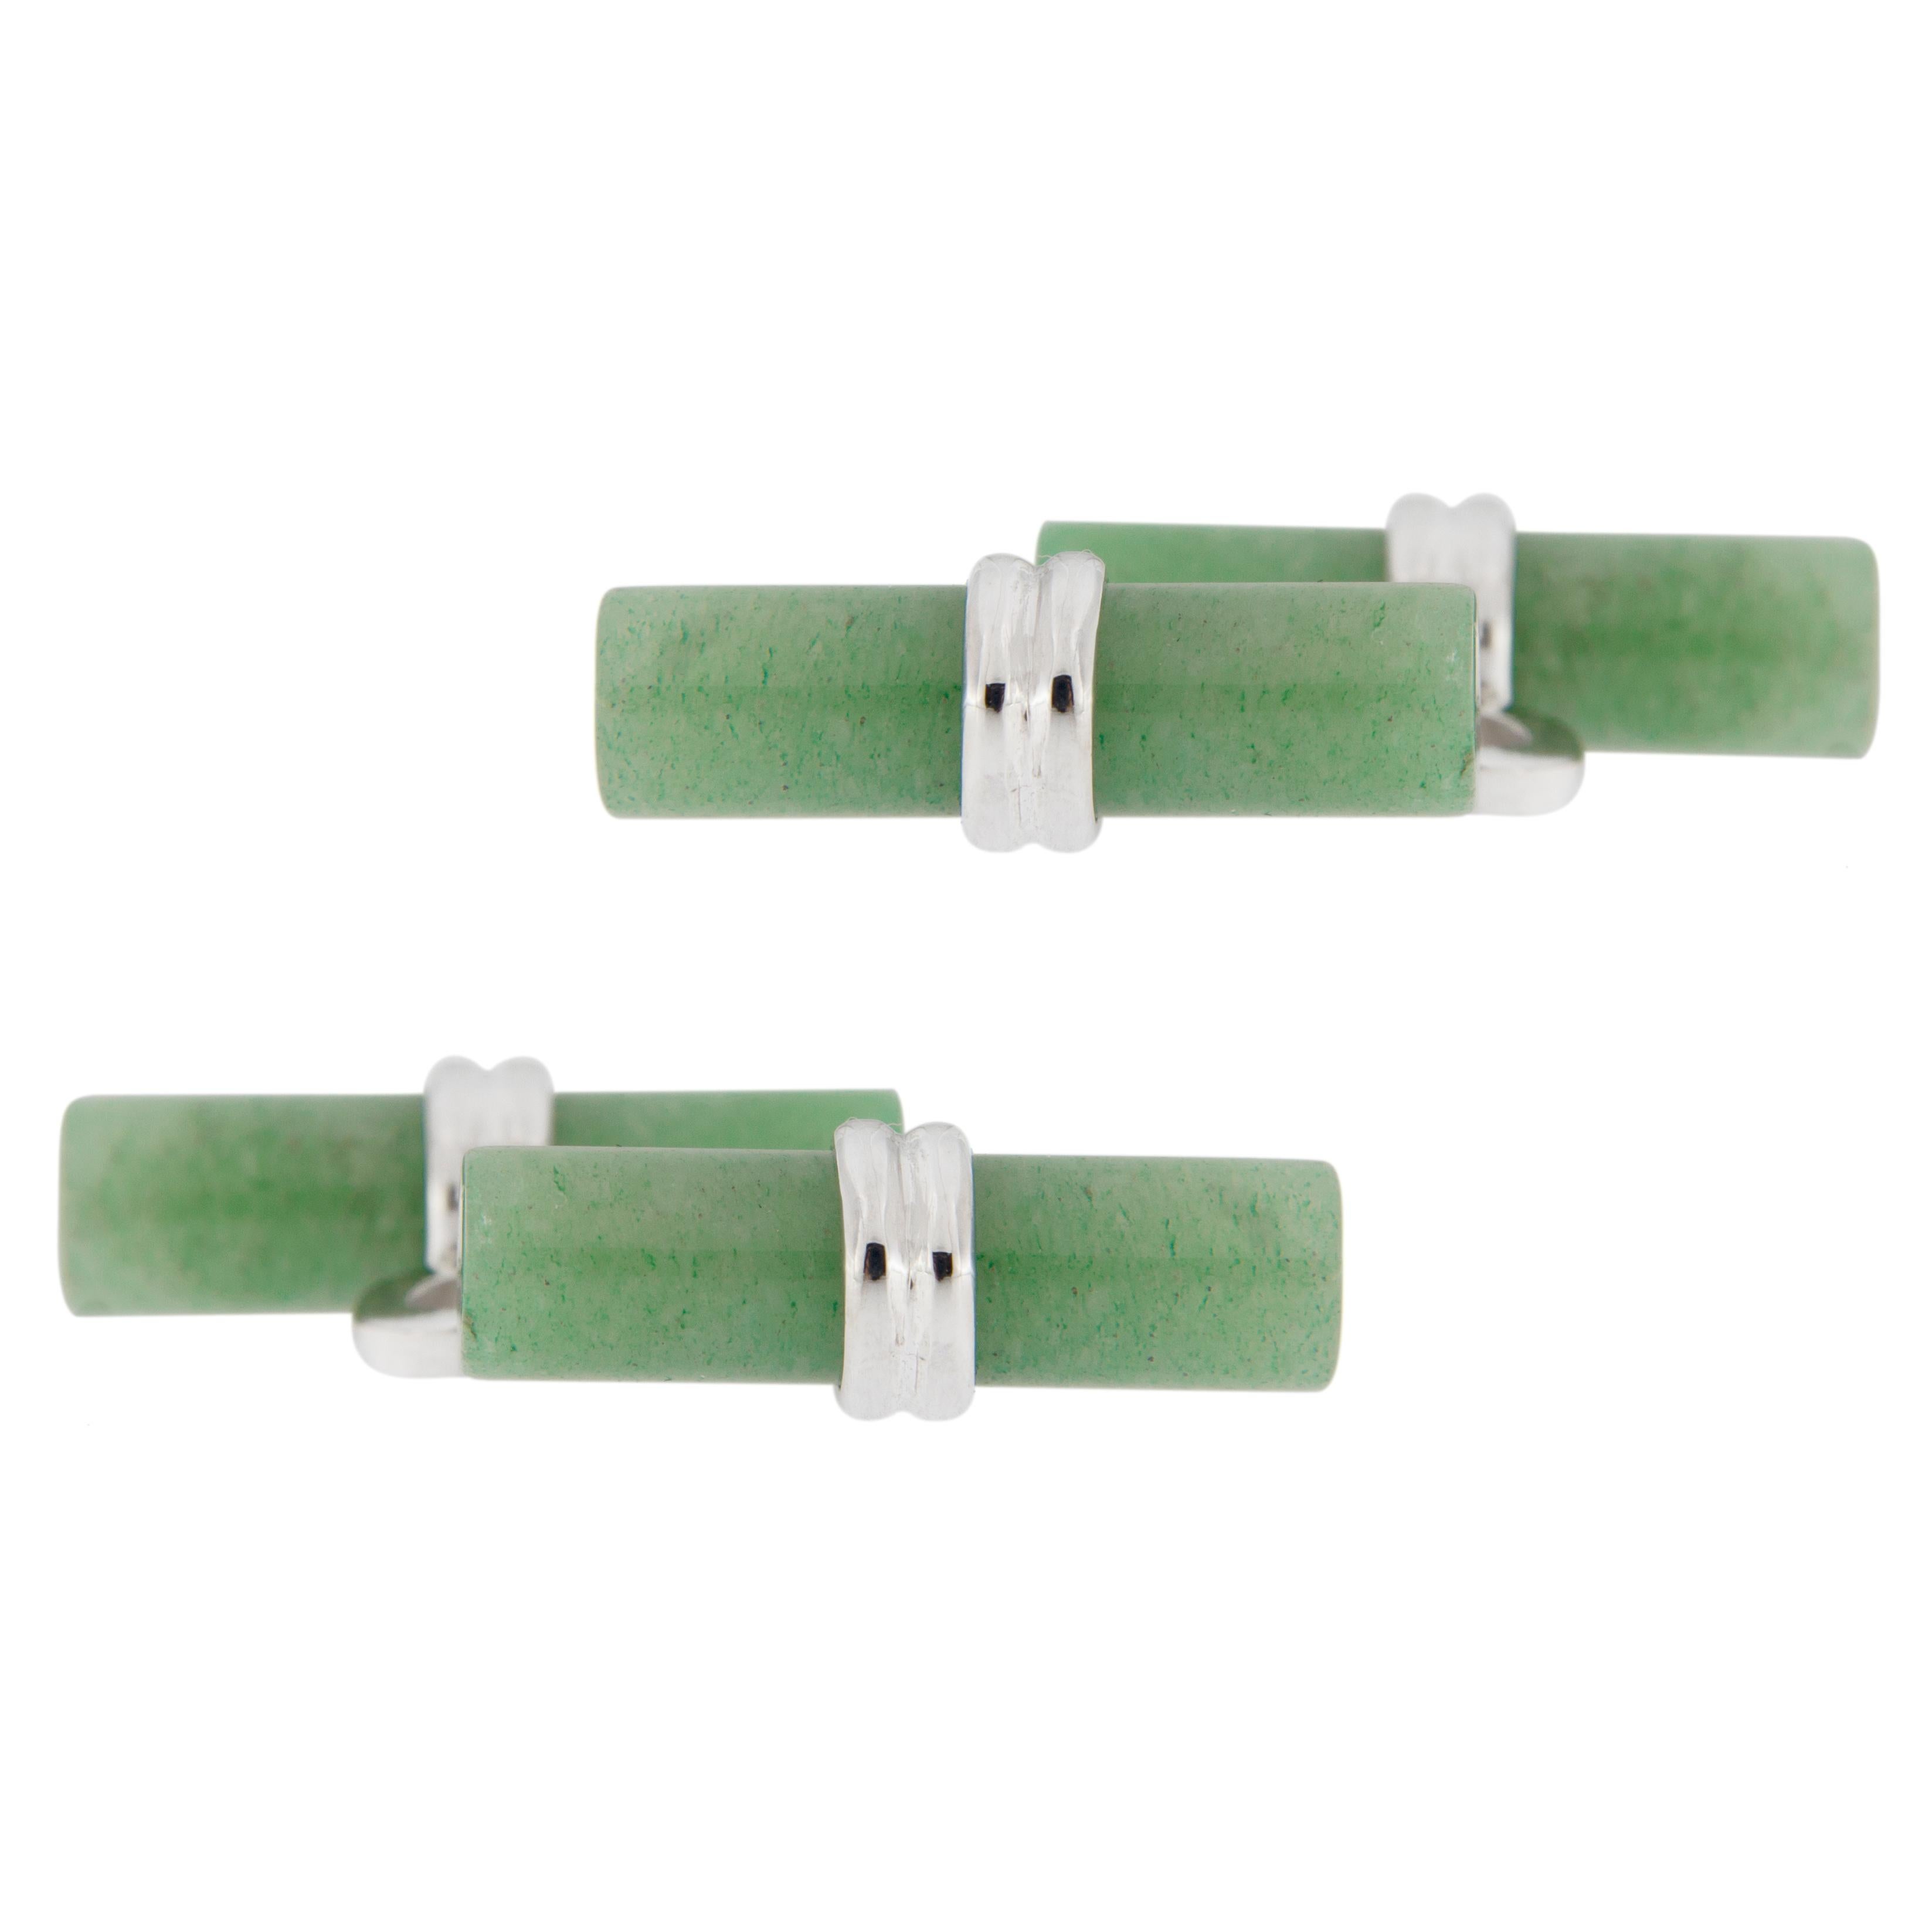 Jona design collection Green Aventurine cylinder cufflinks mounted in 925/°°° sterling silver Rhodium Plated. Marked JONA 925.
Measurements: L 0.76 in/ 19.2mm x W 0.20 in / 5.4mm (each cylinder). 
All Jona jewelry is new and has never been